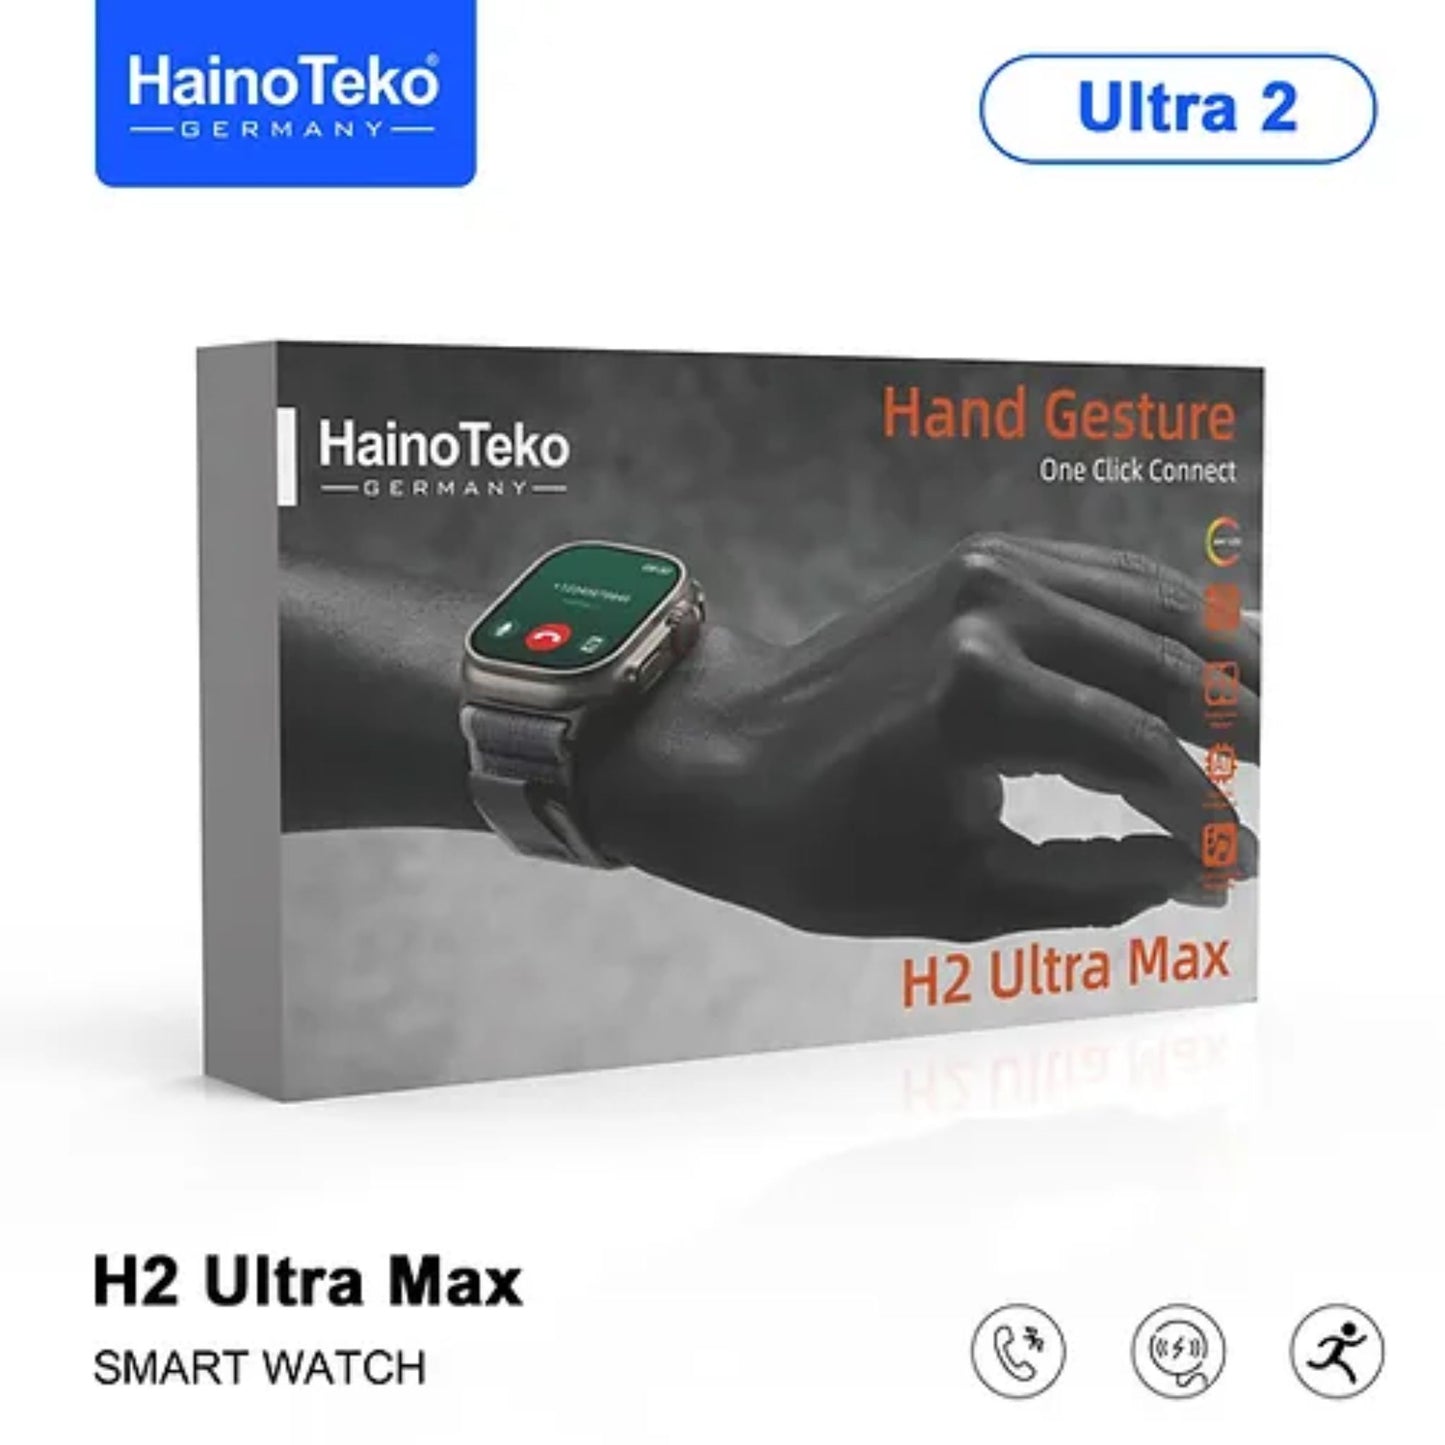 Haino Teko ultra max smart watch with full screen AMOLED display 2 pair straps and wireless charger for men's and boys